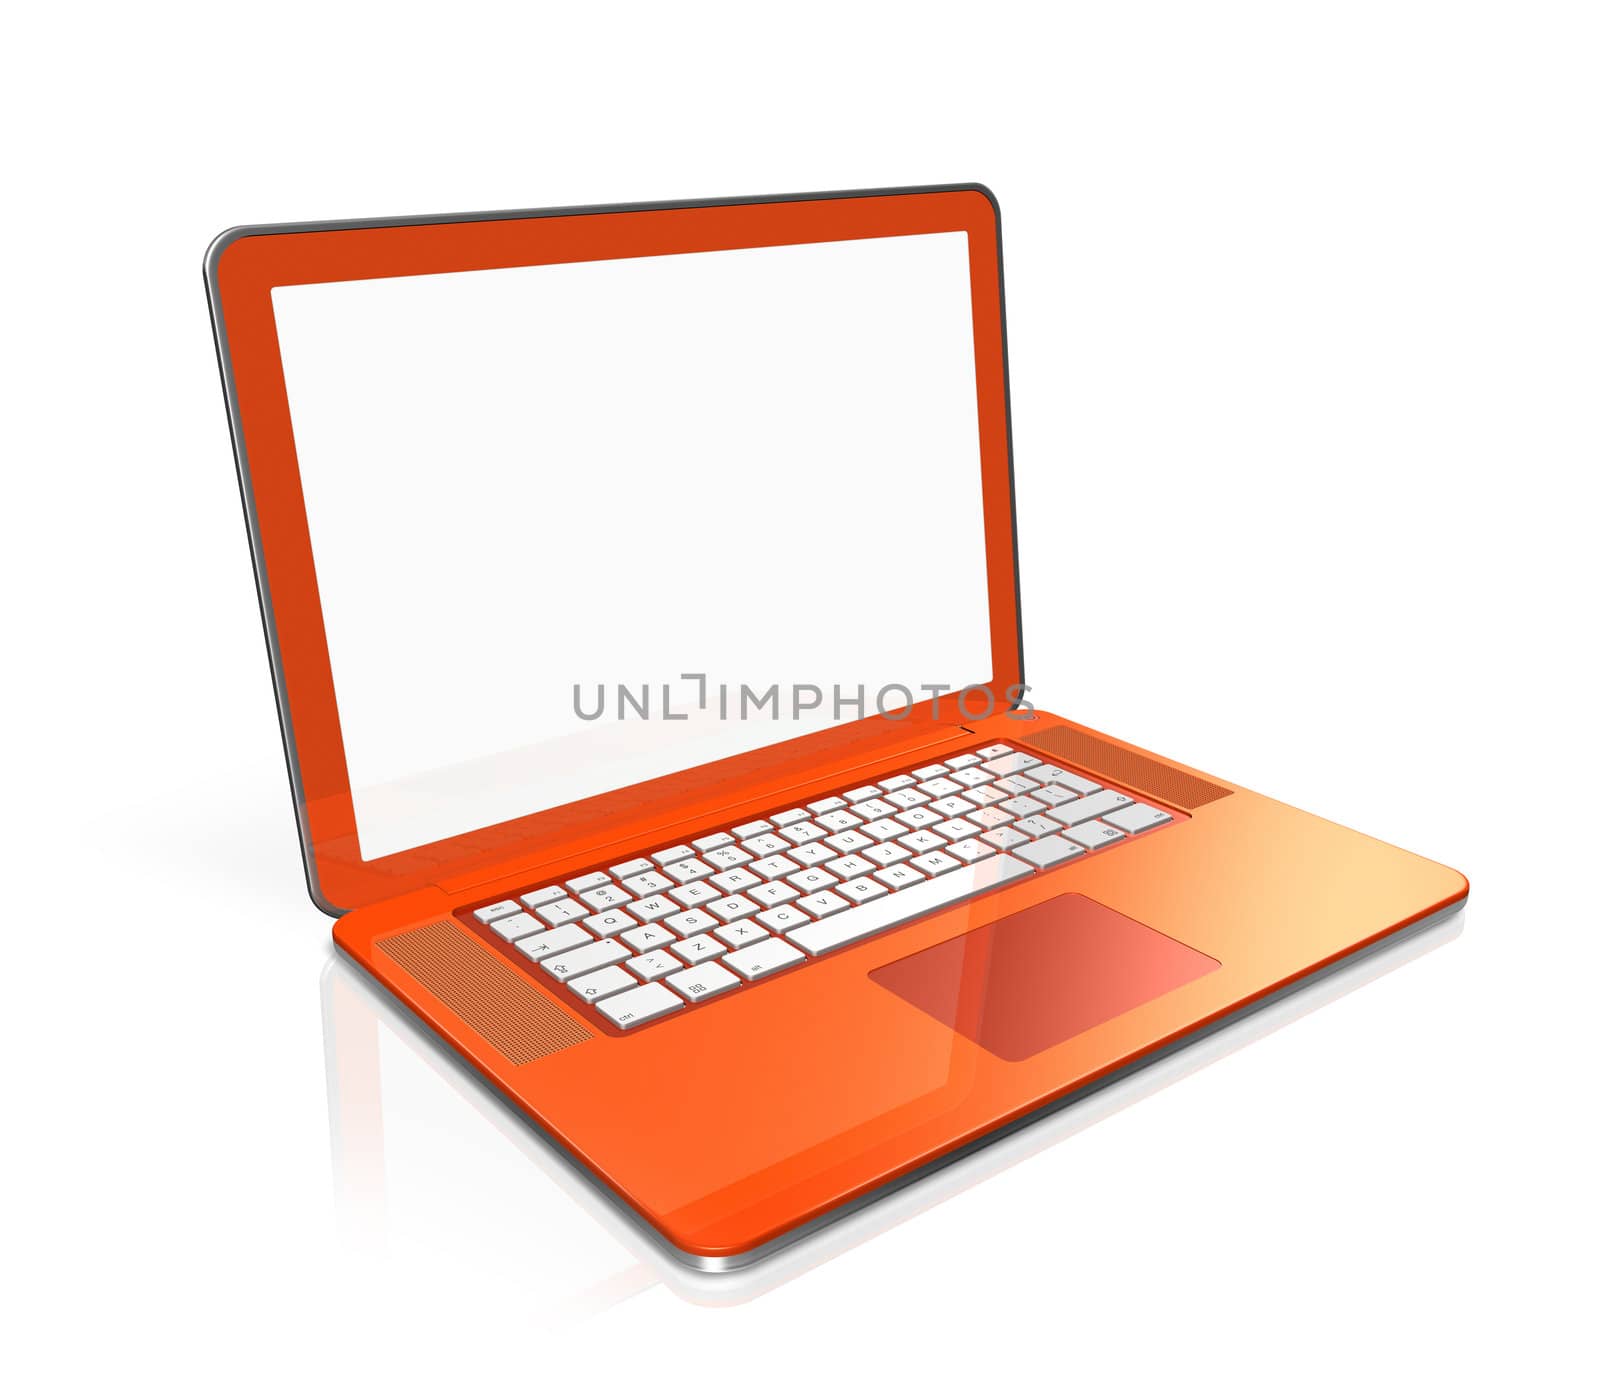 3D black laptop computer isolated on white with 2 clipping path : one for global scene and one for the screen